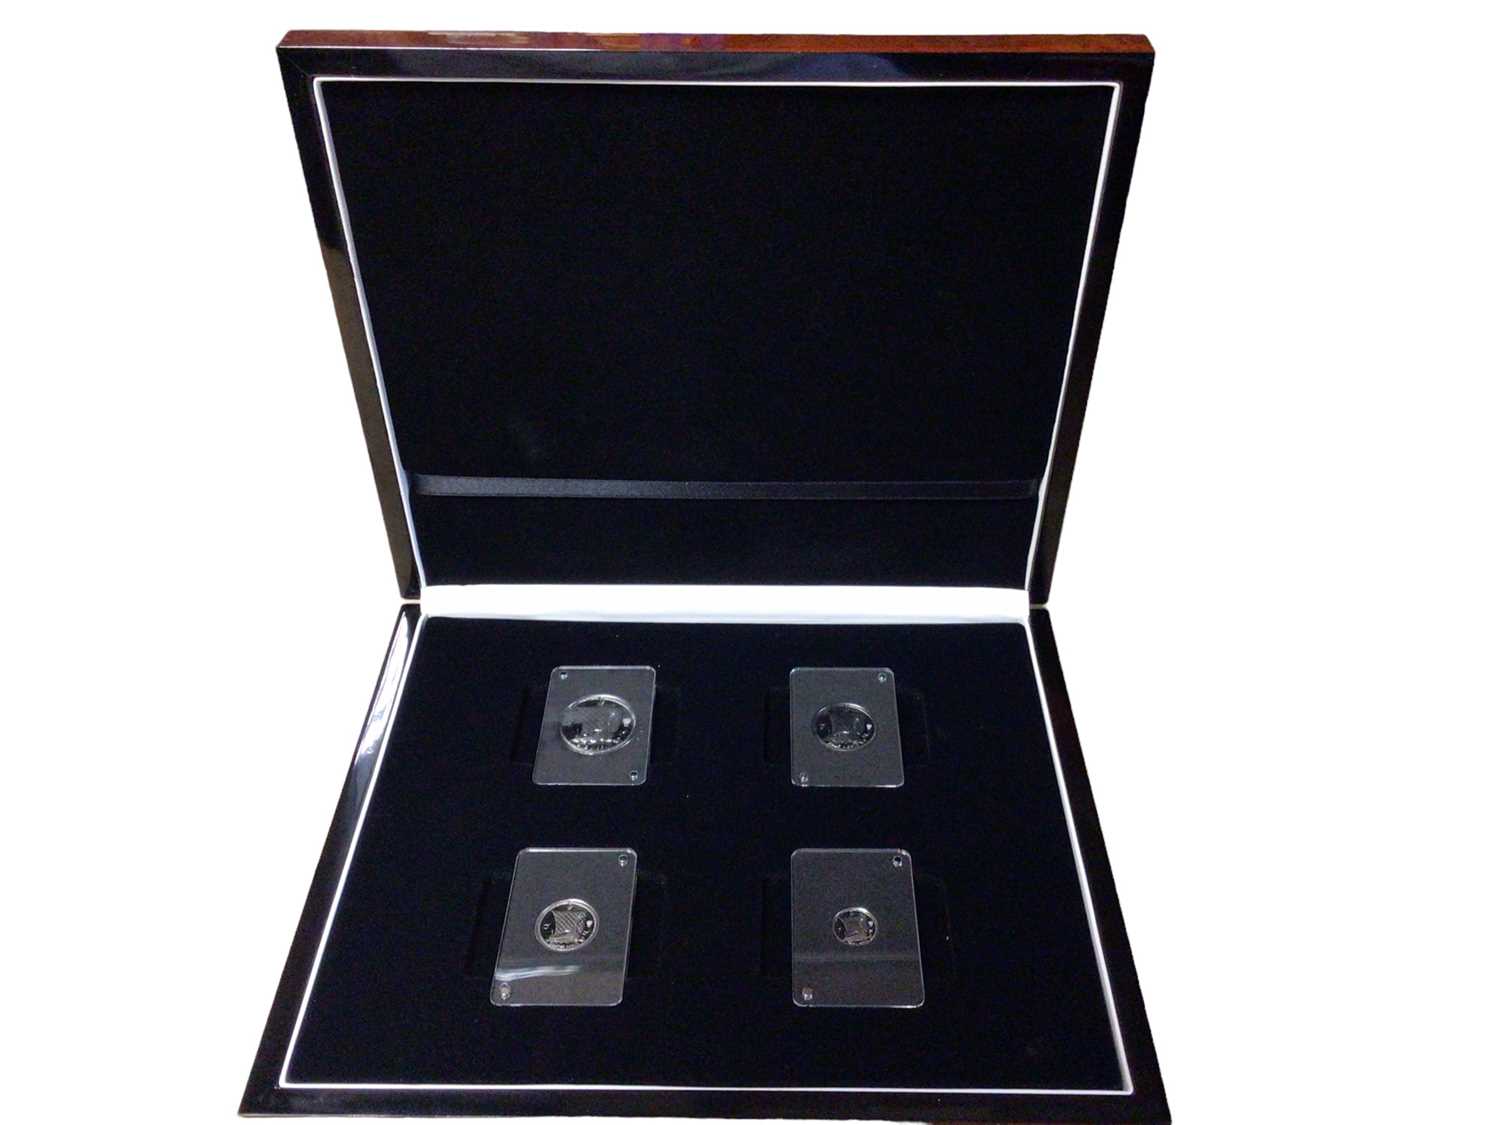 Lot 529 - Isle of Man - L.M.O. HM Queen Elizabeth II 90th Birthday four coin .995 fine platinum proof 'Noble Collection' to include Noble (Wt. 31.103gms), Half Noble (Wt. 15.55gms), Quarter Noble (Wt. 7.77gm...